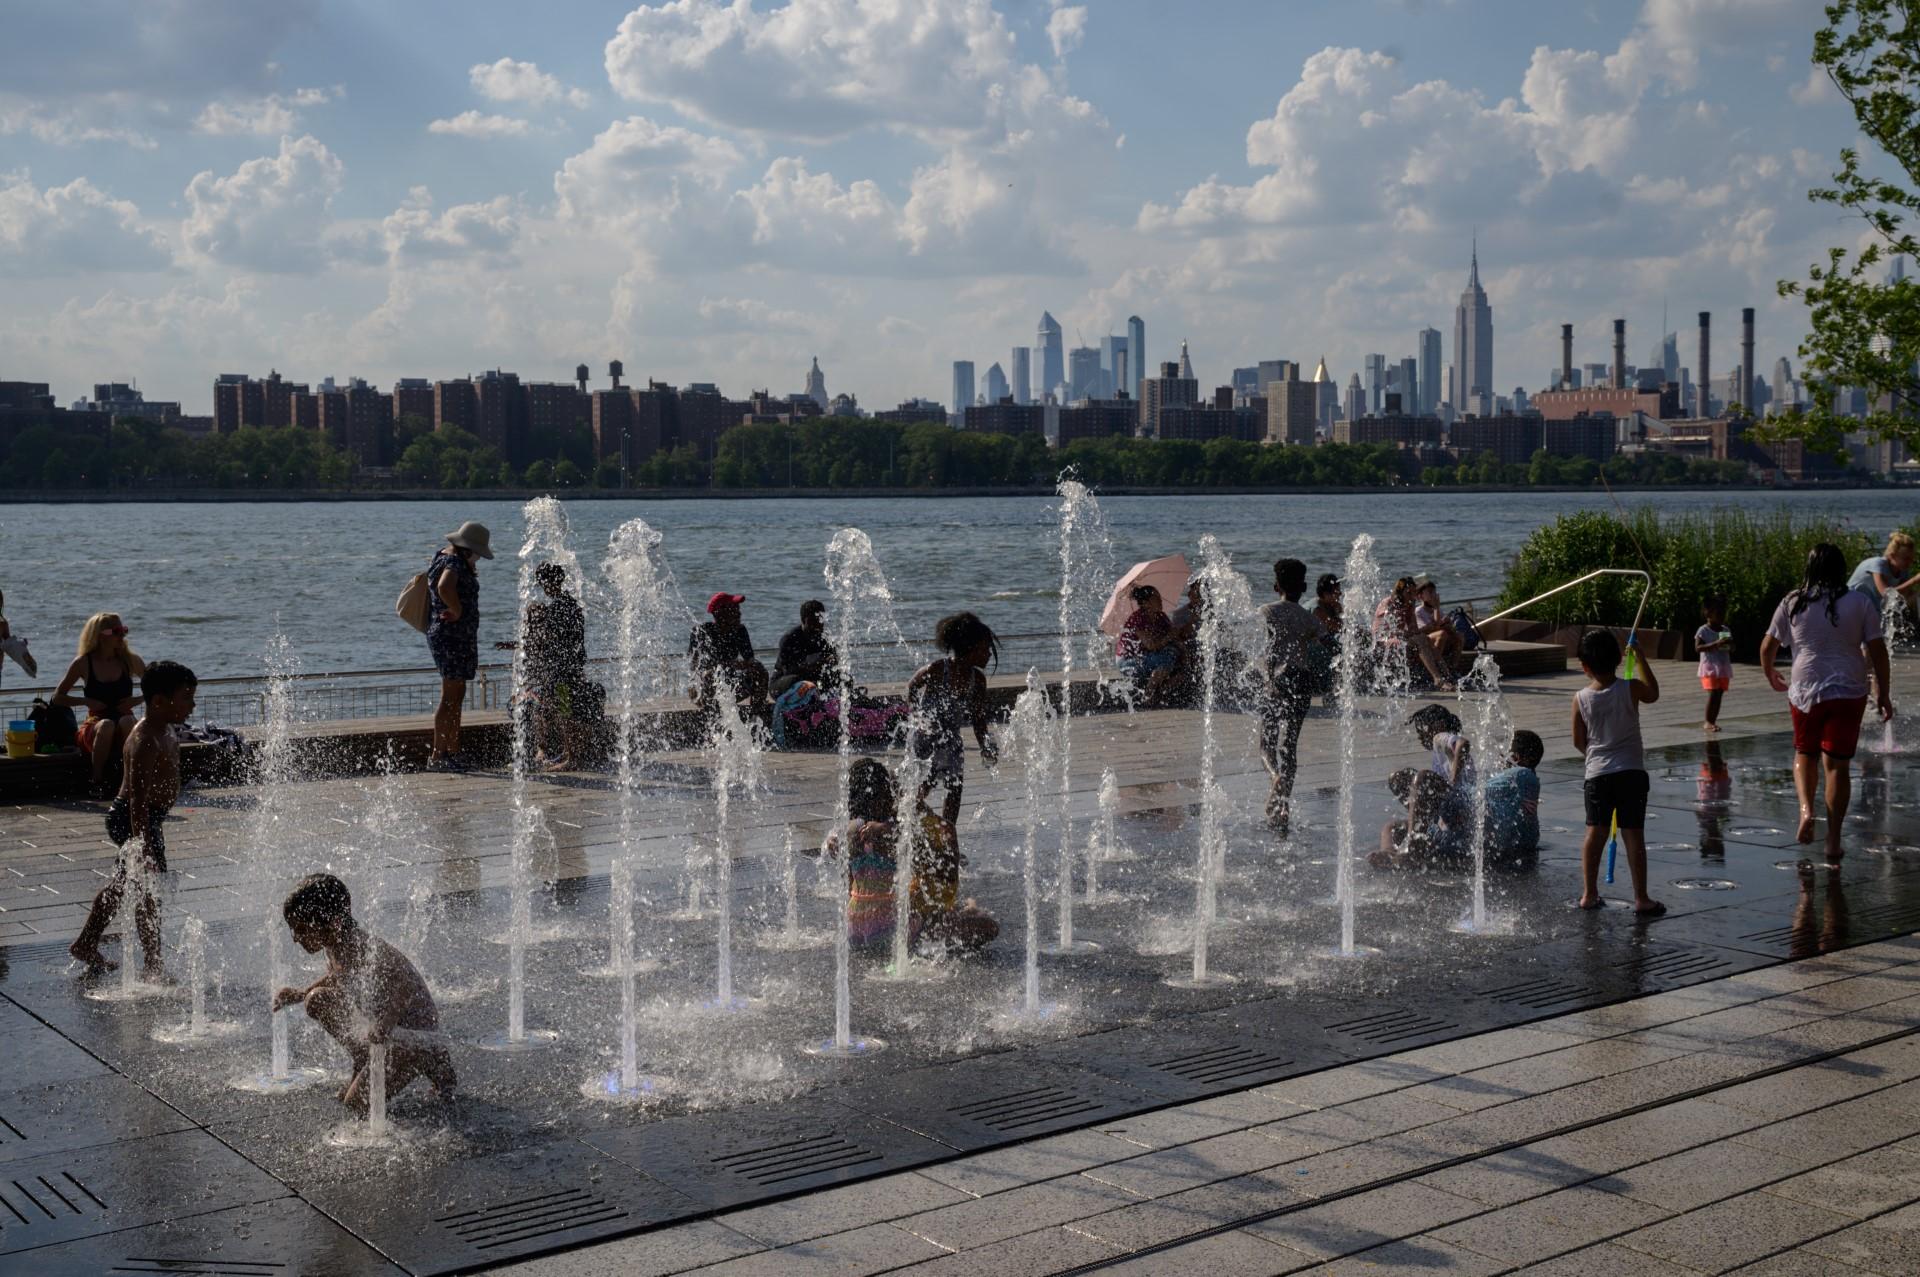 Children play in a water fountain before the Manhattan city skyline at a park in Brooklyn, New York, on June 30. Photo: AFP